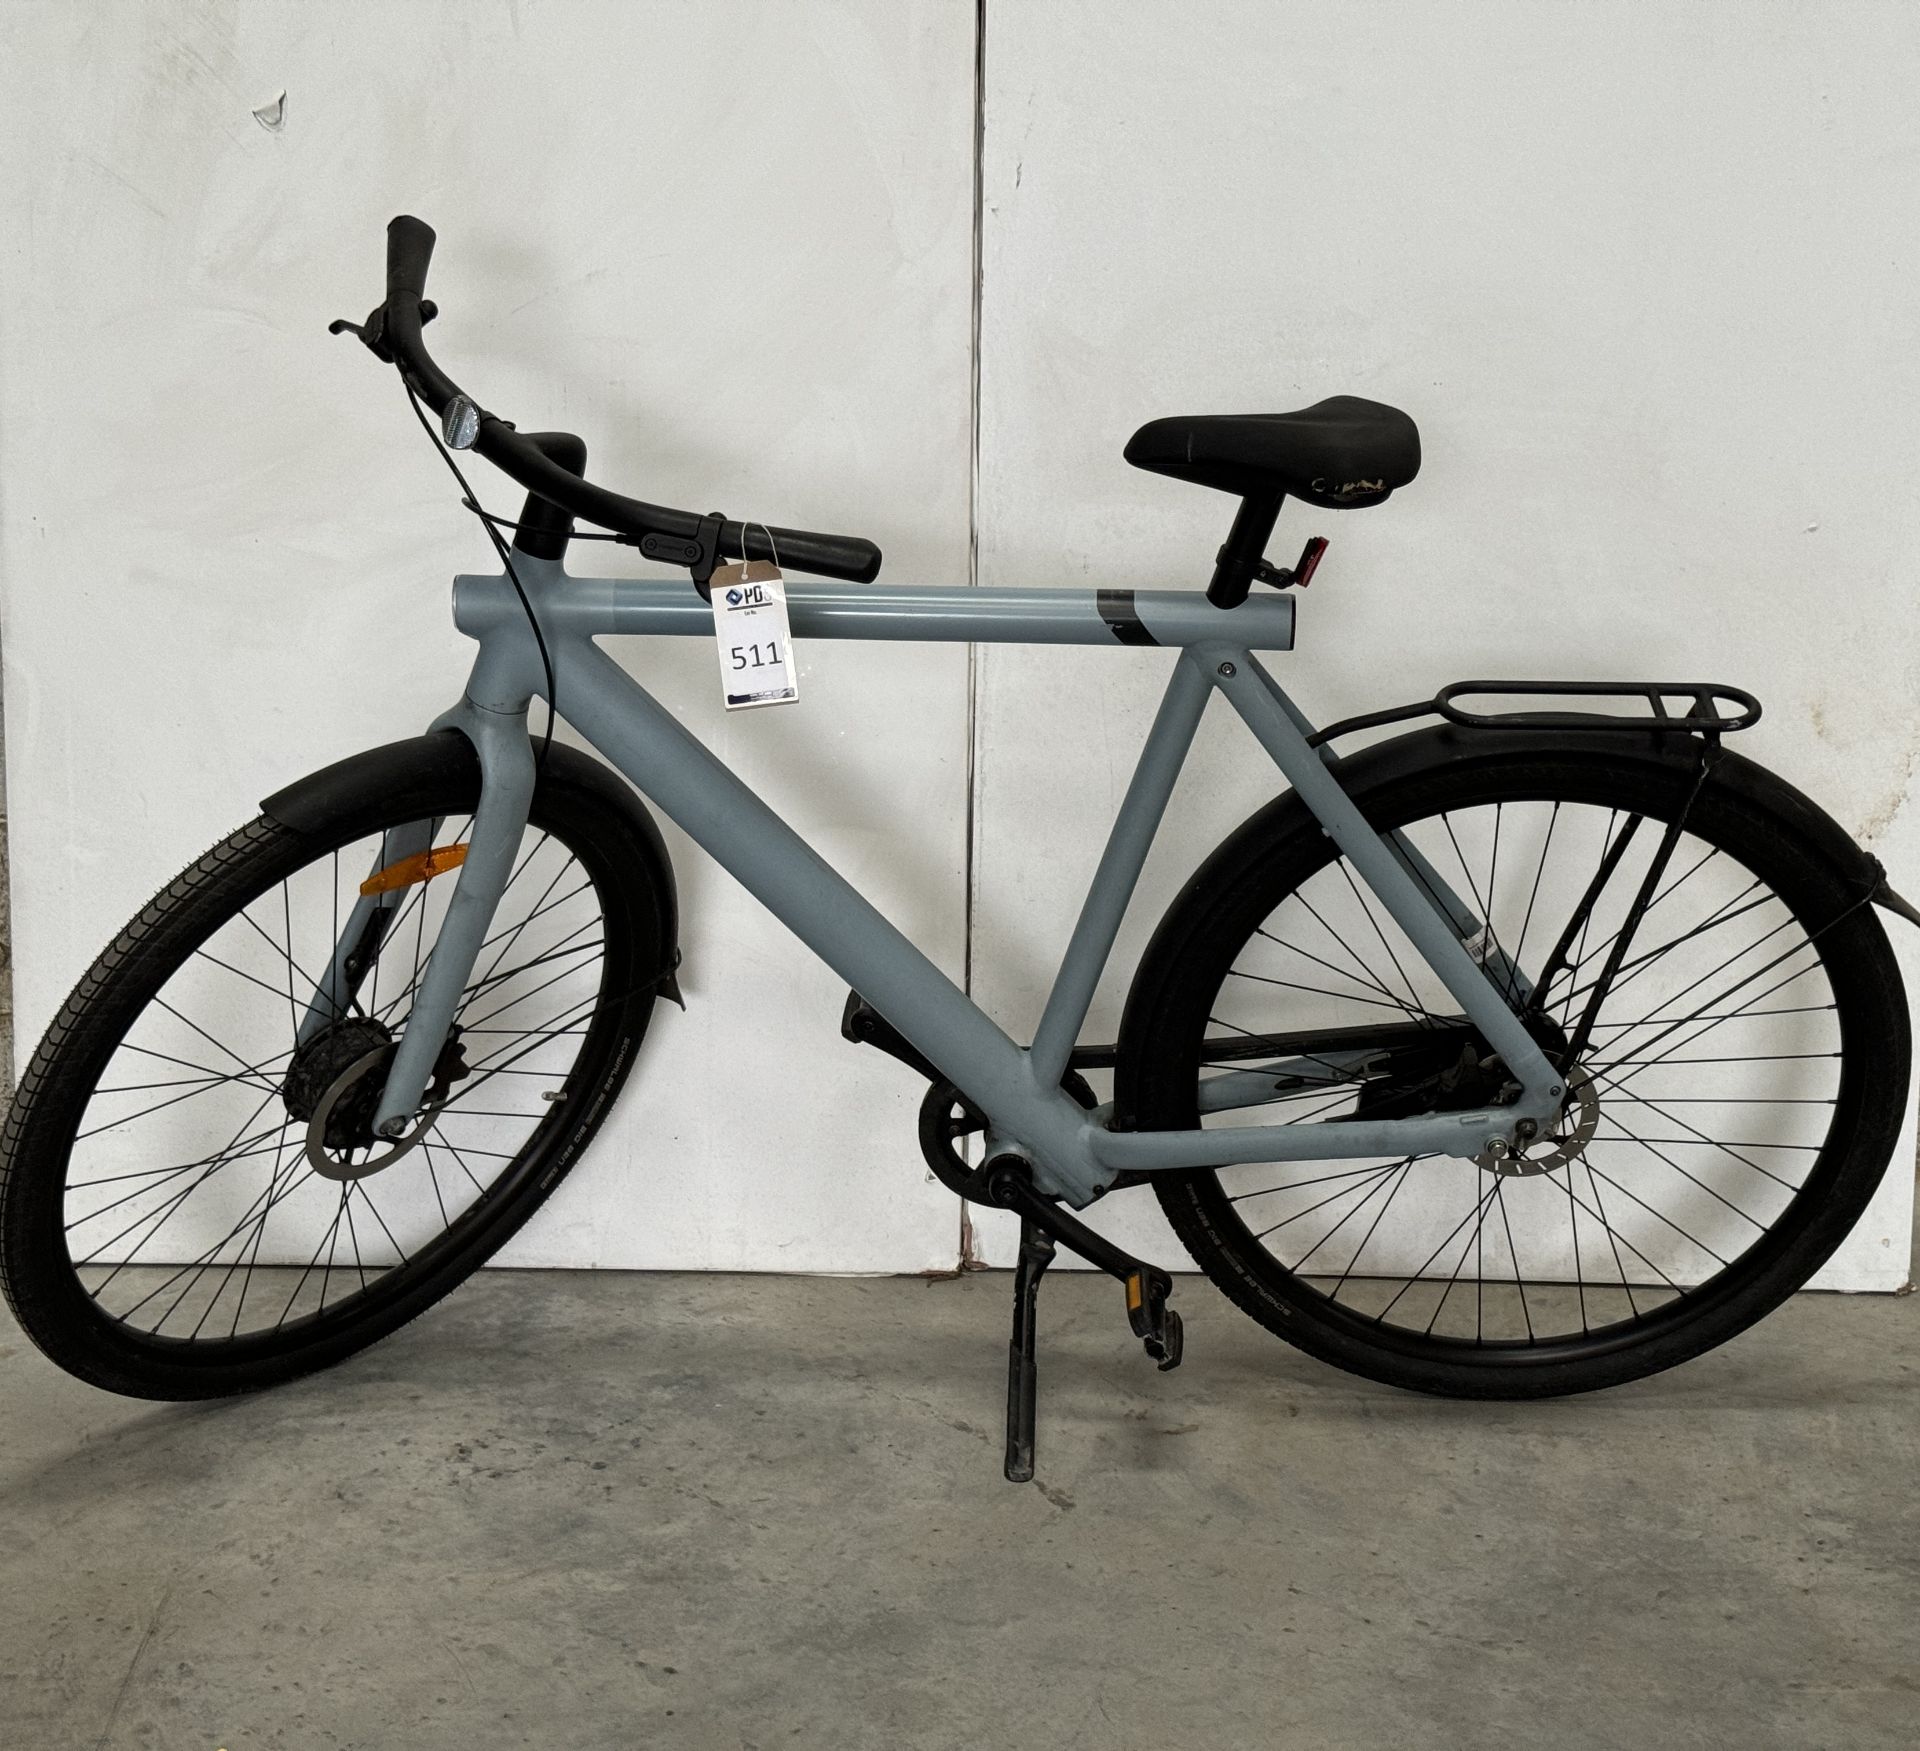 VanMoof S3 Electric Bike, Frame Number ASY3111363 (NOT ROADWORTHY - FOR SPARES ONLY) (No codes